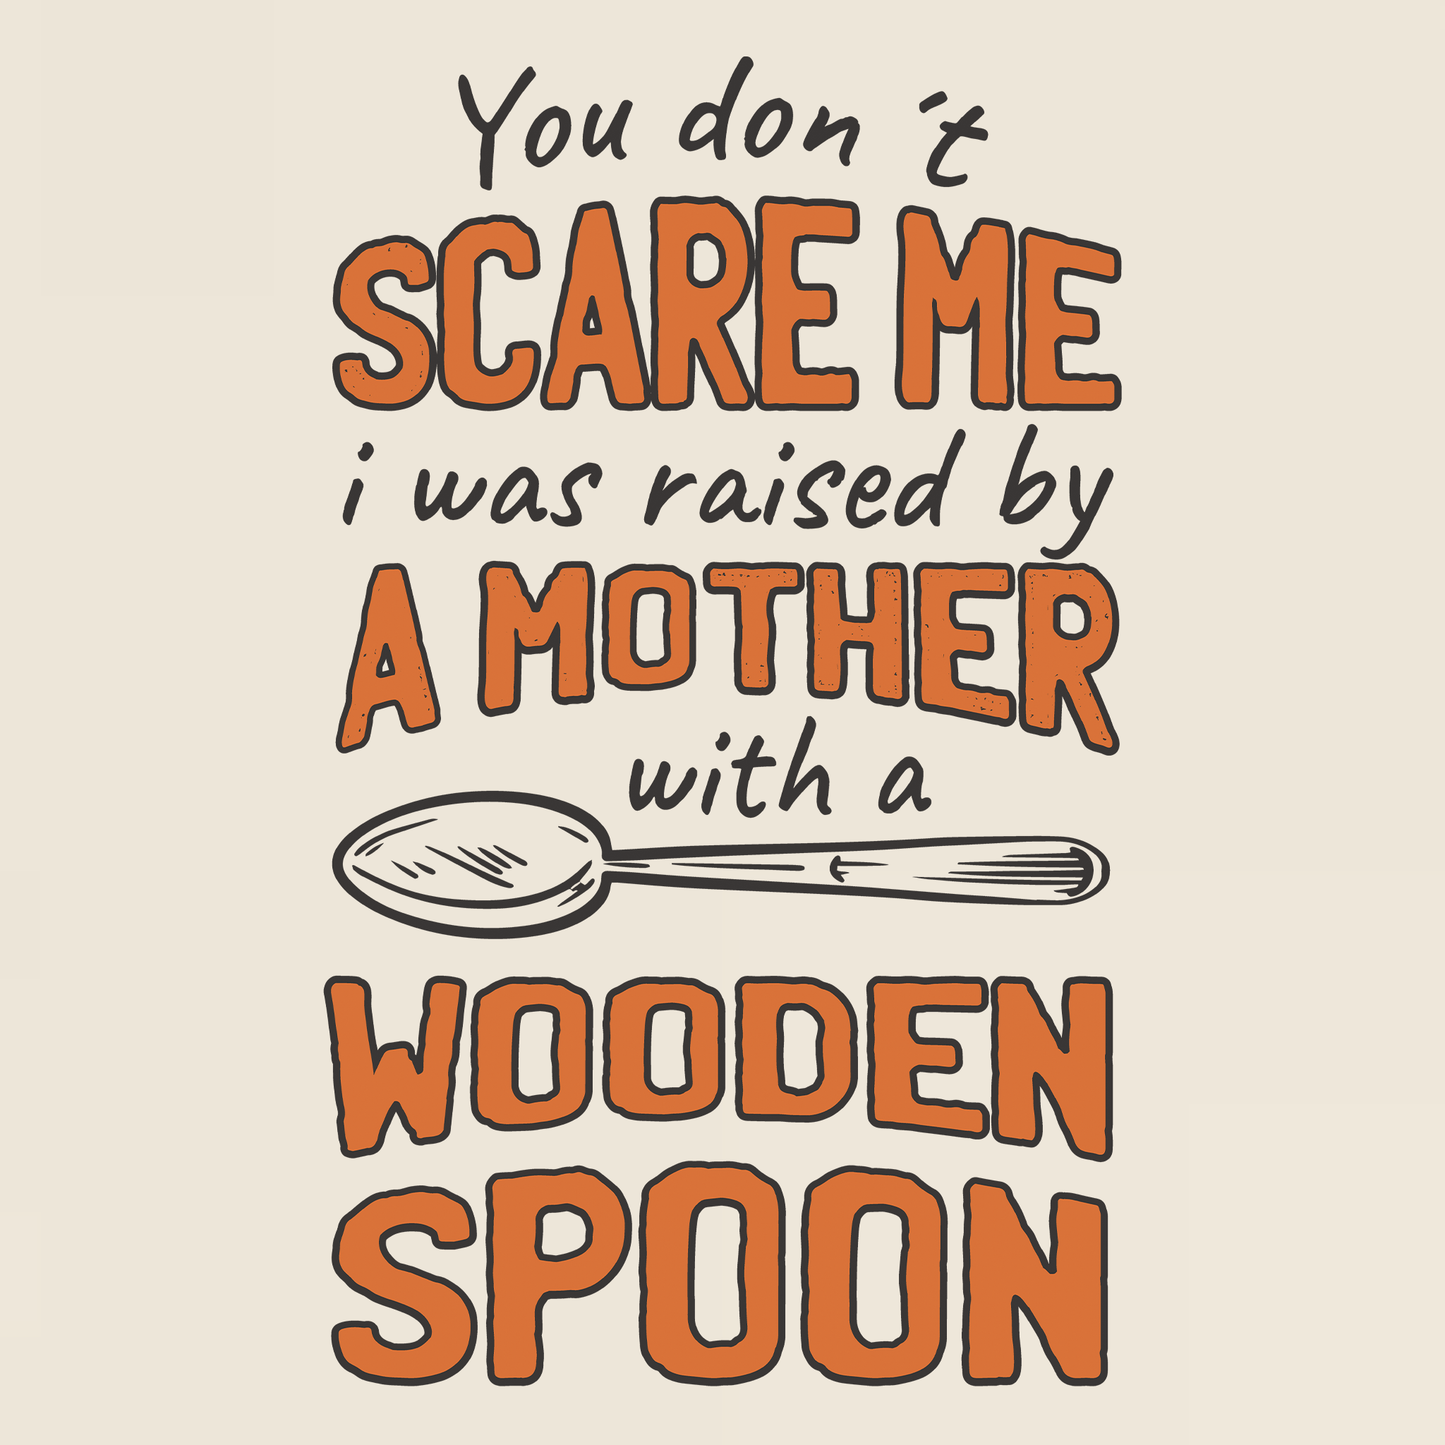 Raised By A Mother With A Wooden Spoon T-Shirt